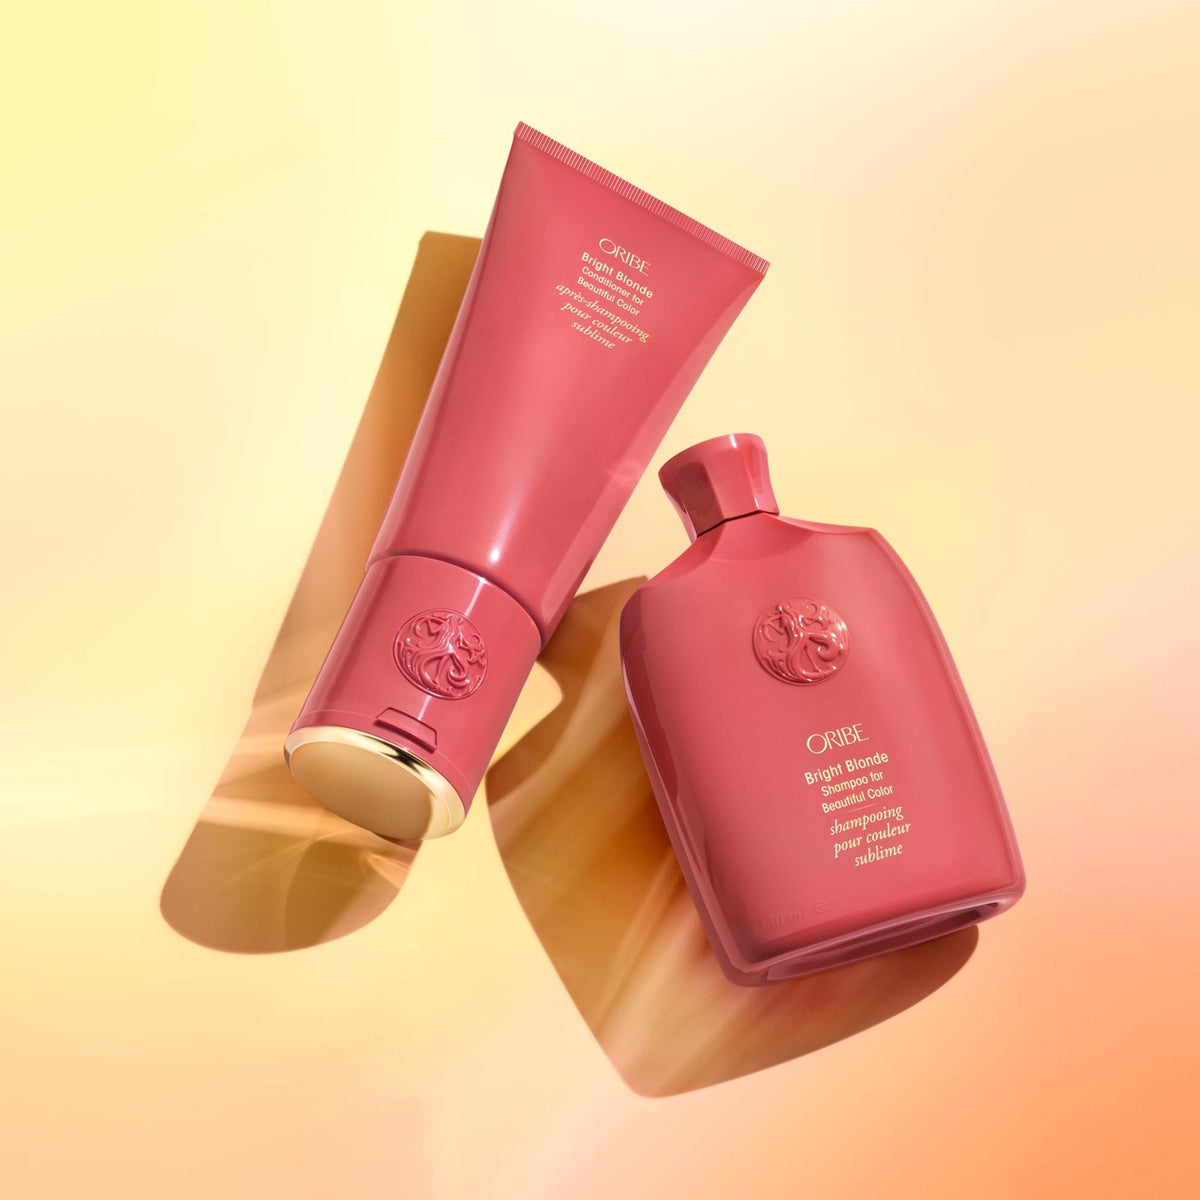 Oribe Bright Blonde For Beautiful Color Shampoo . This product is for blonde hair